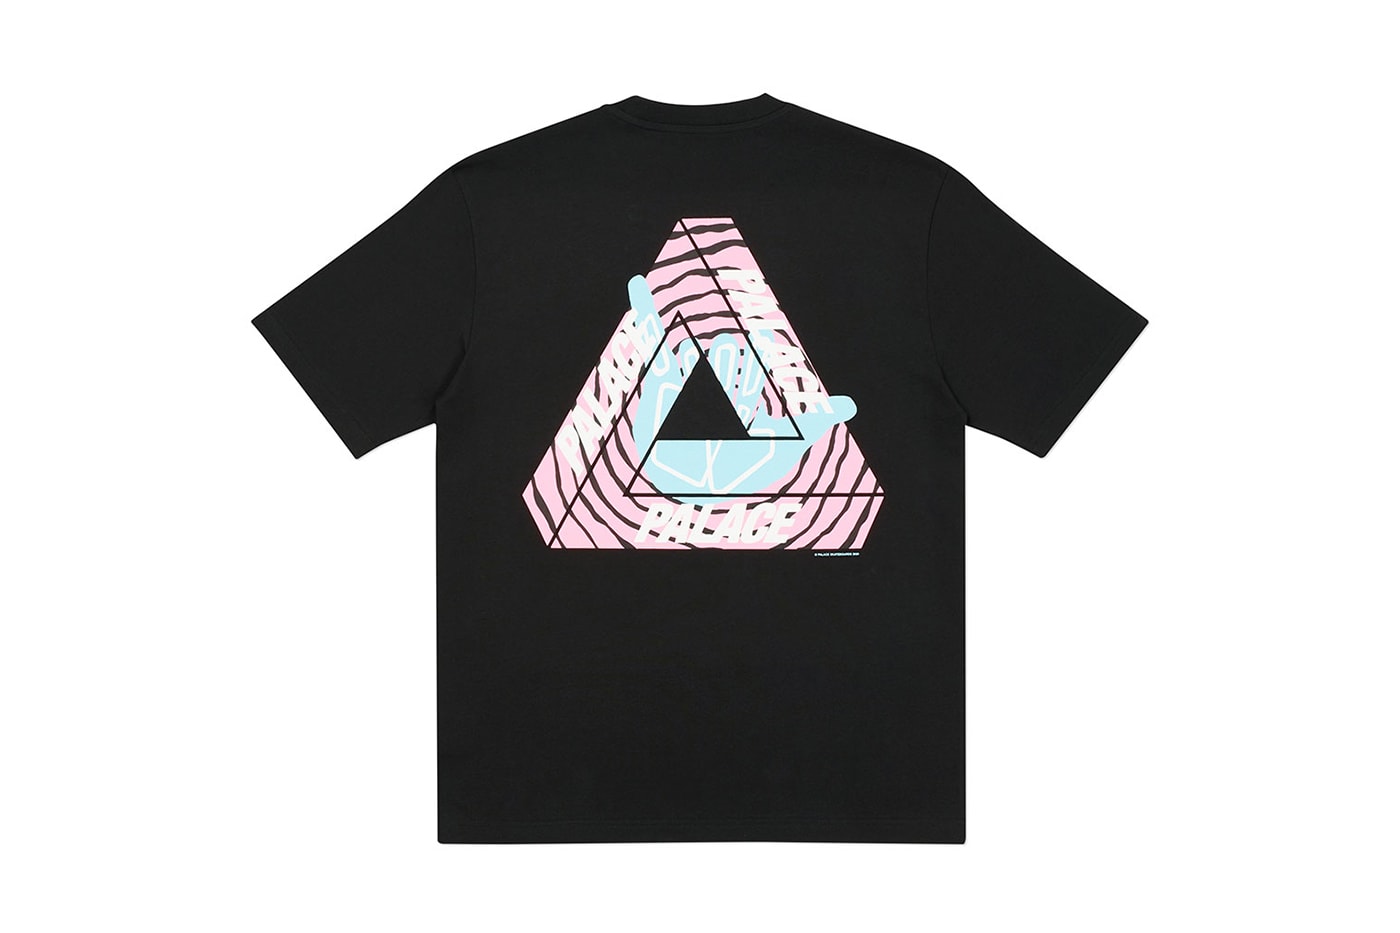 Palace Fall 2020 Tees T-shirts Tri Ferg Release Info Date Buy Price